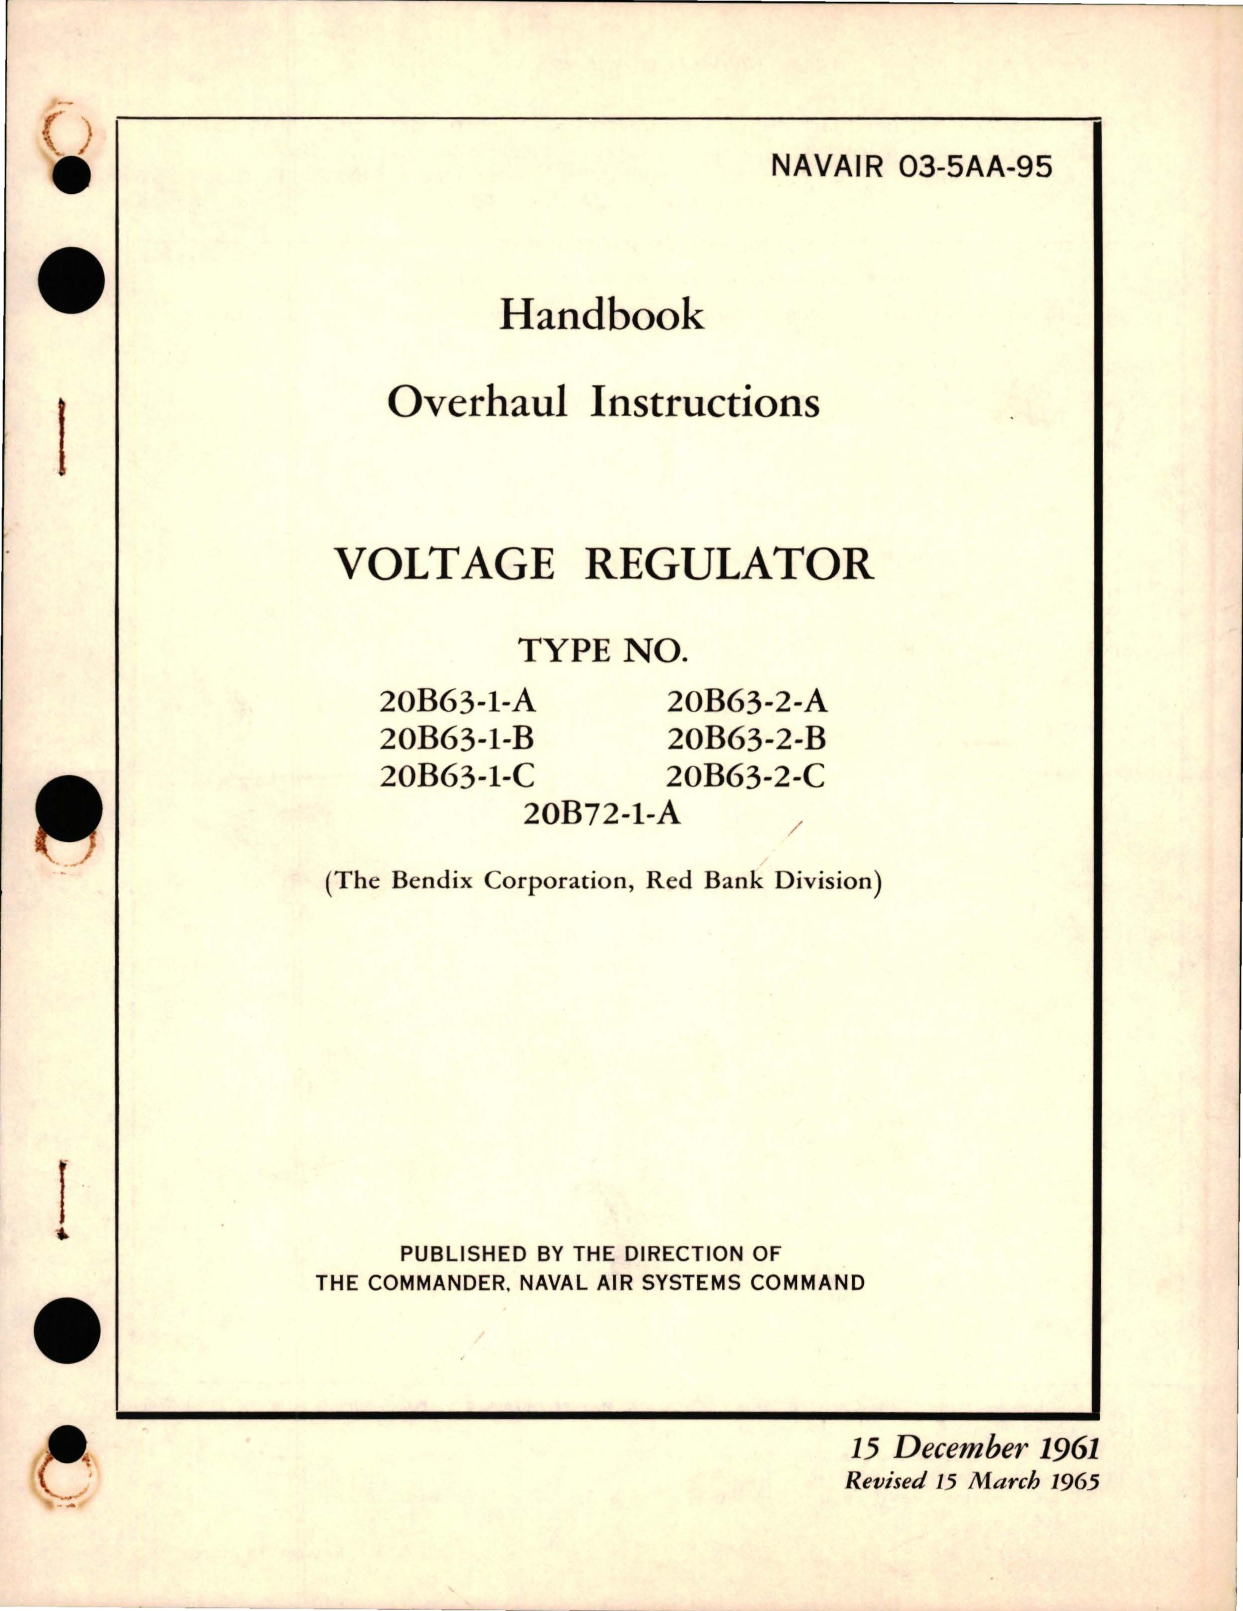 Sample page 1 from AirCorps Library document: Overhaul Instructions for Voltage Regulator - Types 20B63-1-A, 20B63-1-B, 20B63-1-C, 20B63-2-A, 20B63-2-B, 20B63-2-C, 20B72-1-A